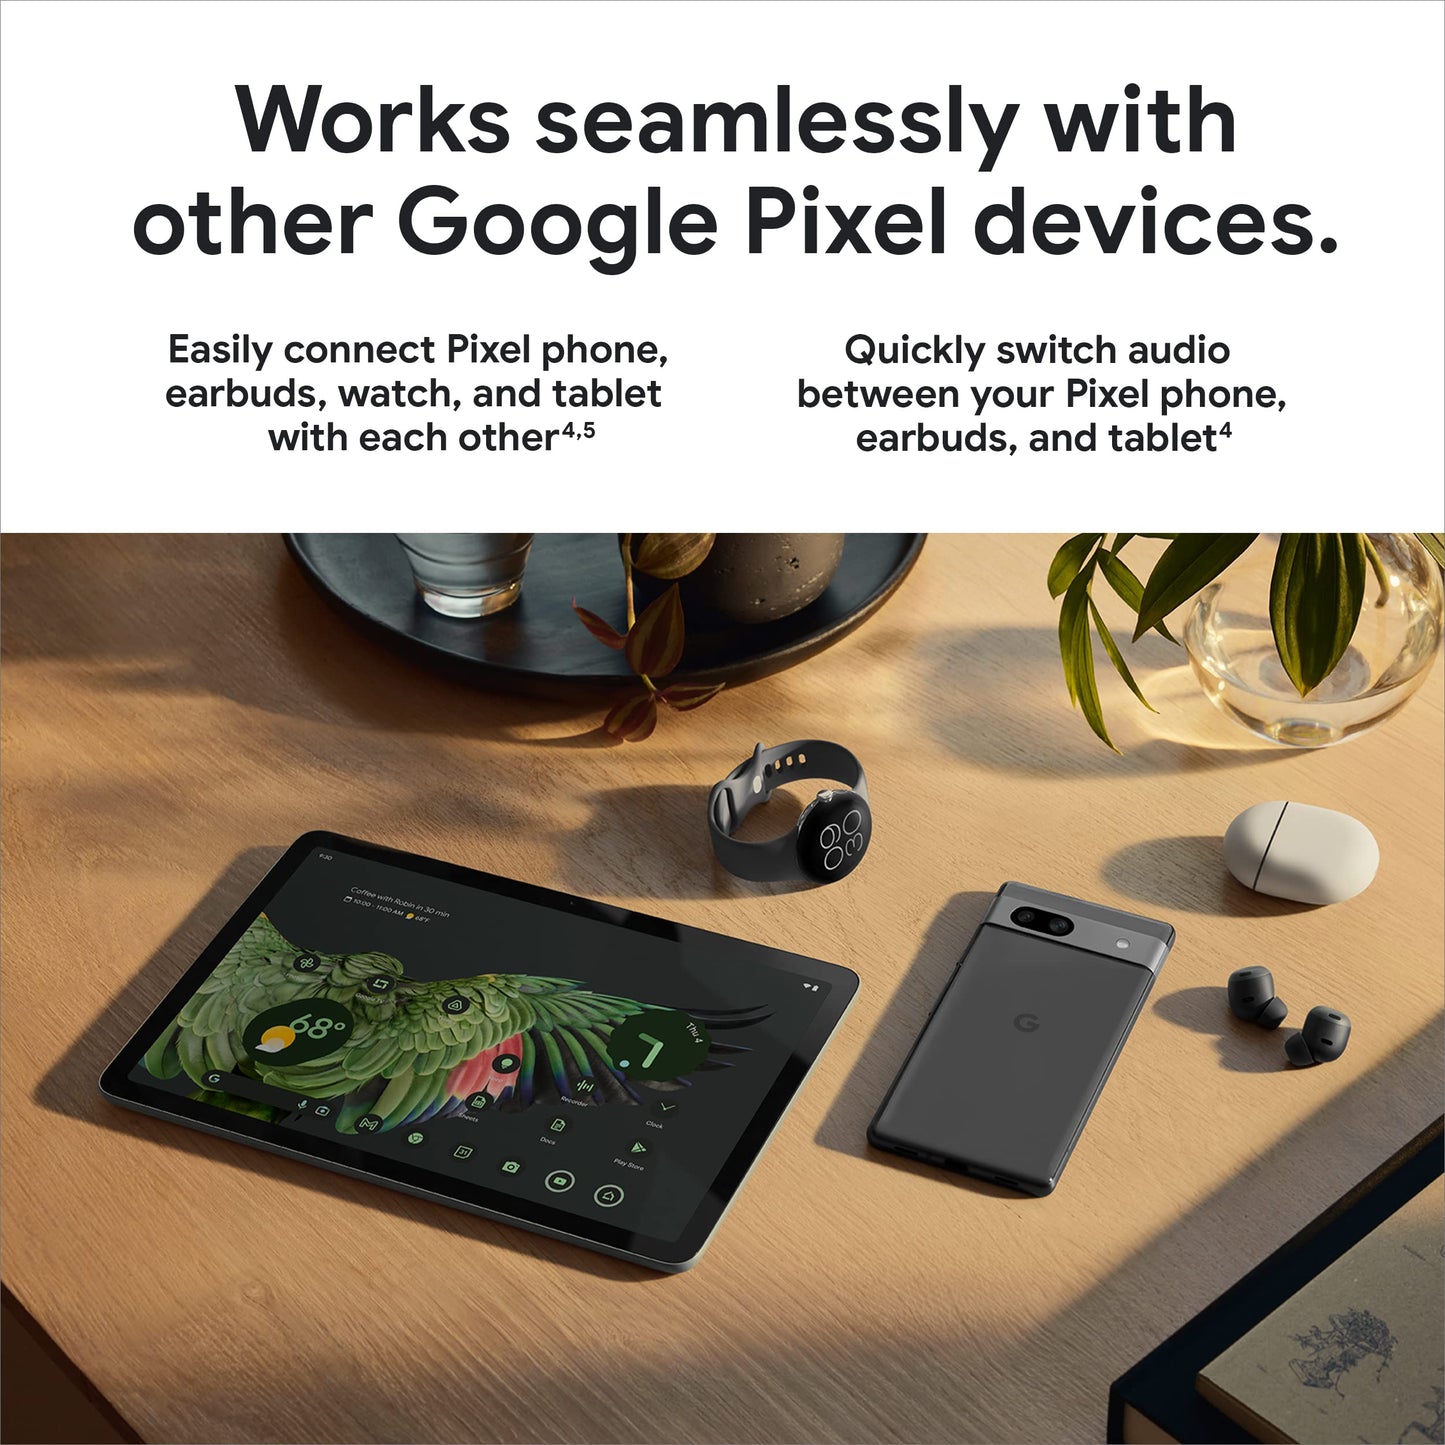 Google Pixel Tablet with Charging Speaker Dock - Android Tablet with 11-Inch Screen, Smart Home Controls, and Long-Lasting Battery - Hazel/Hazel - 256 GB